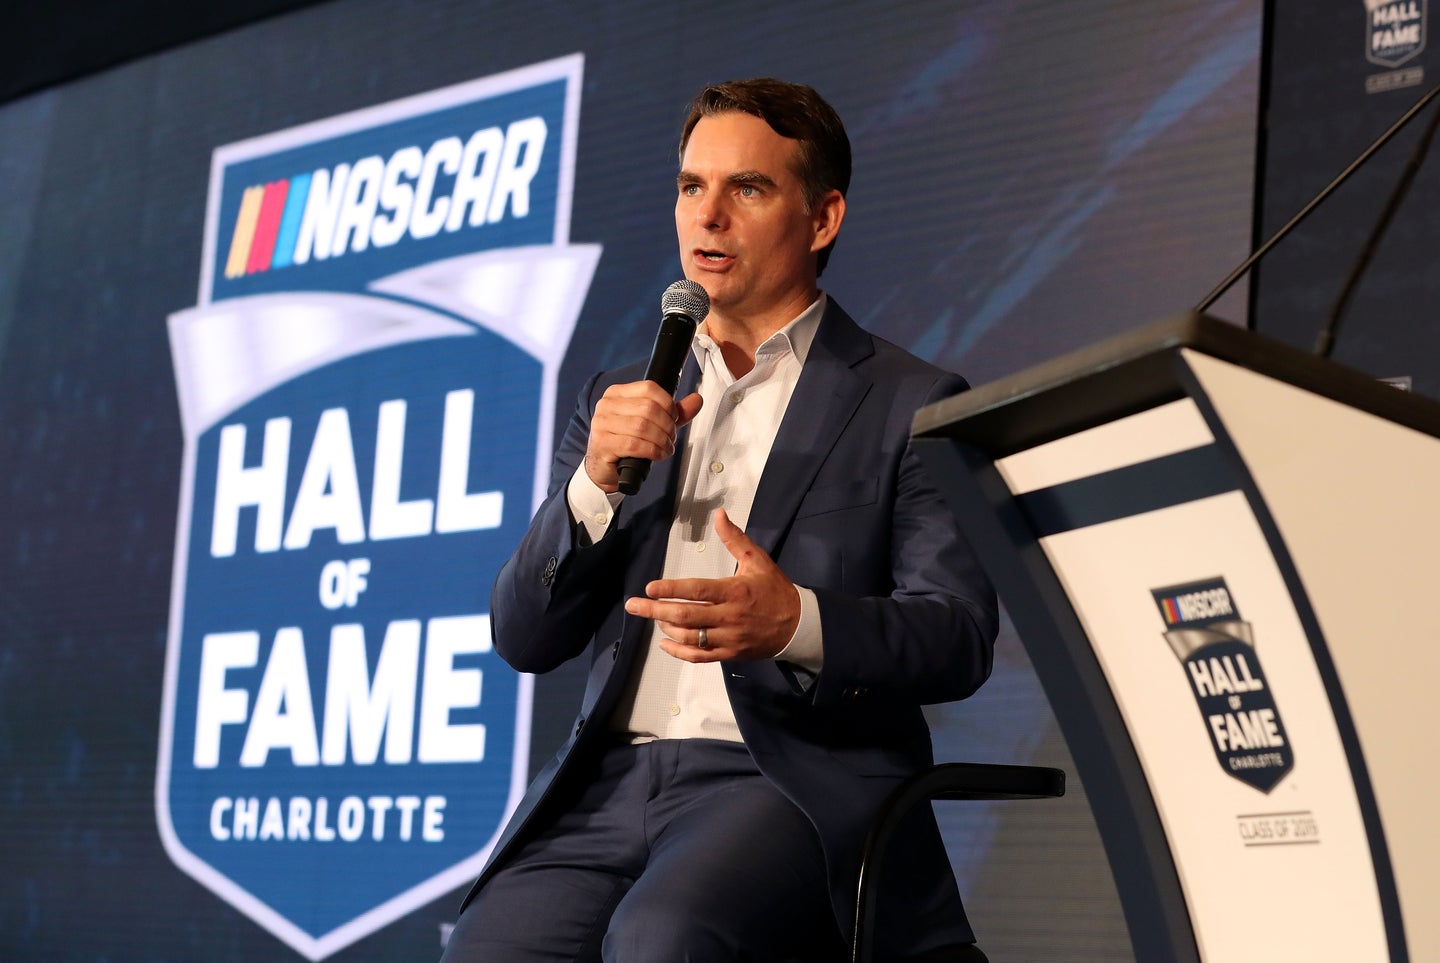 NASCAR Hall of Fame Voting Day